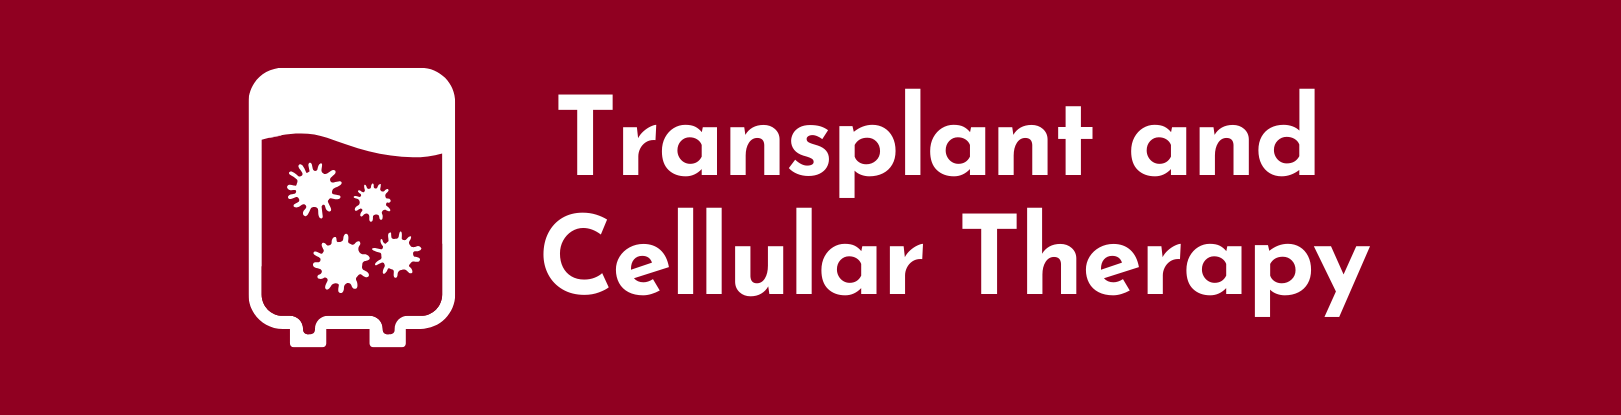 Transplant and Cellular Therapy